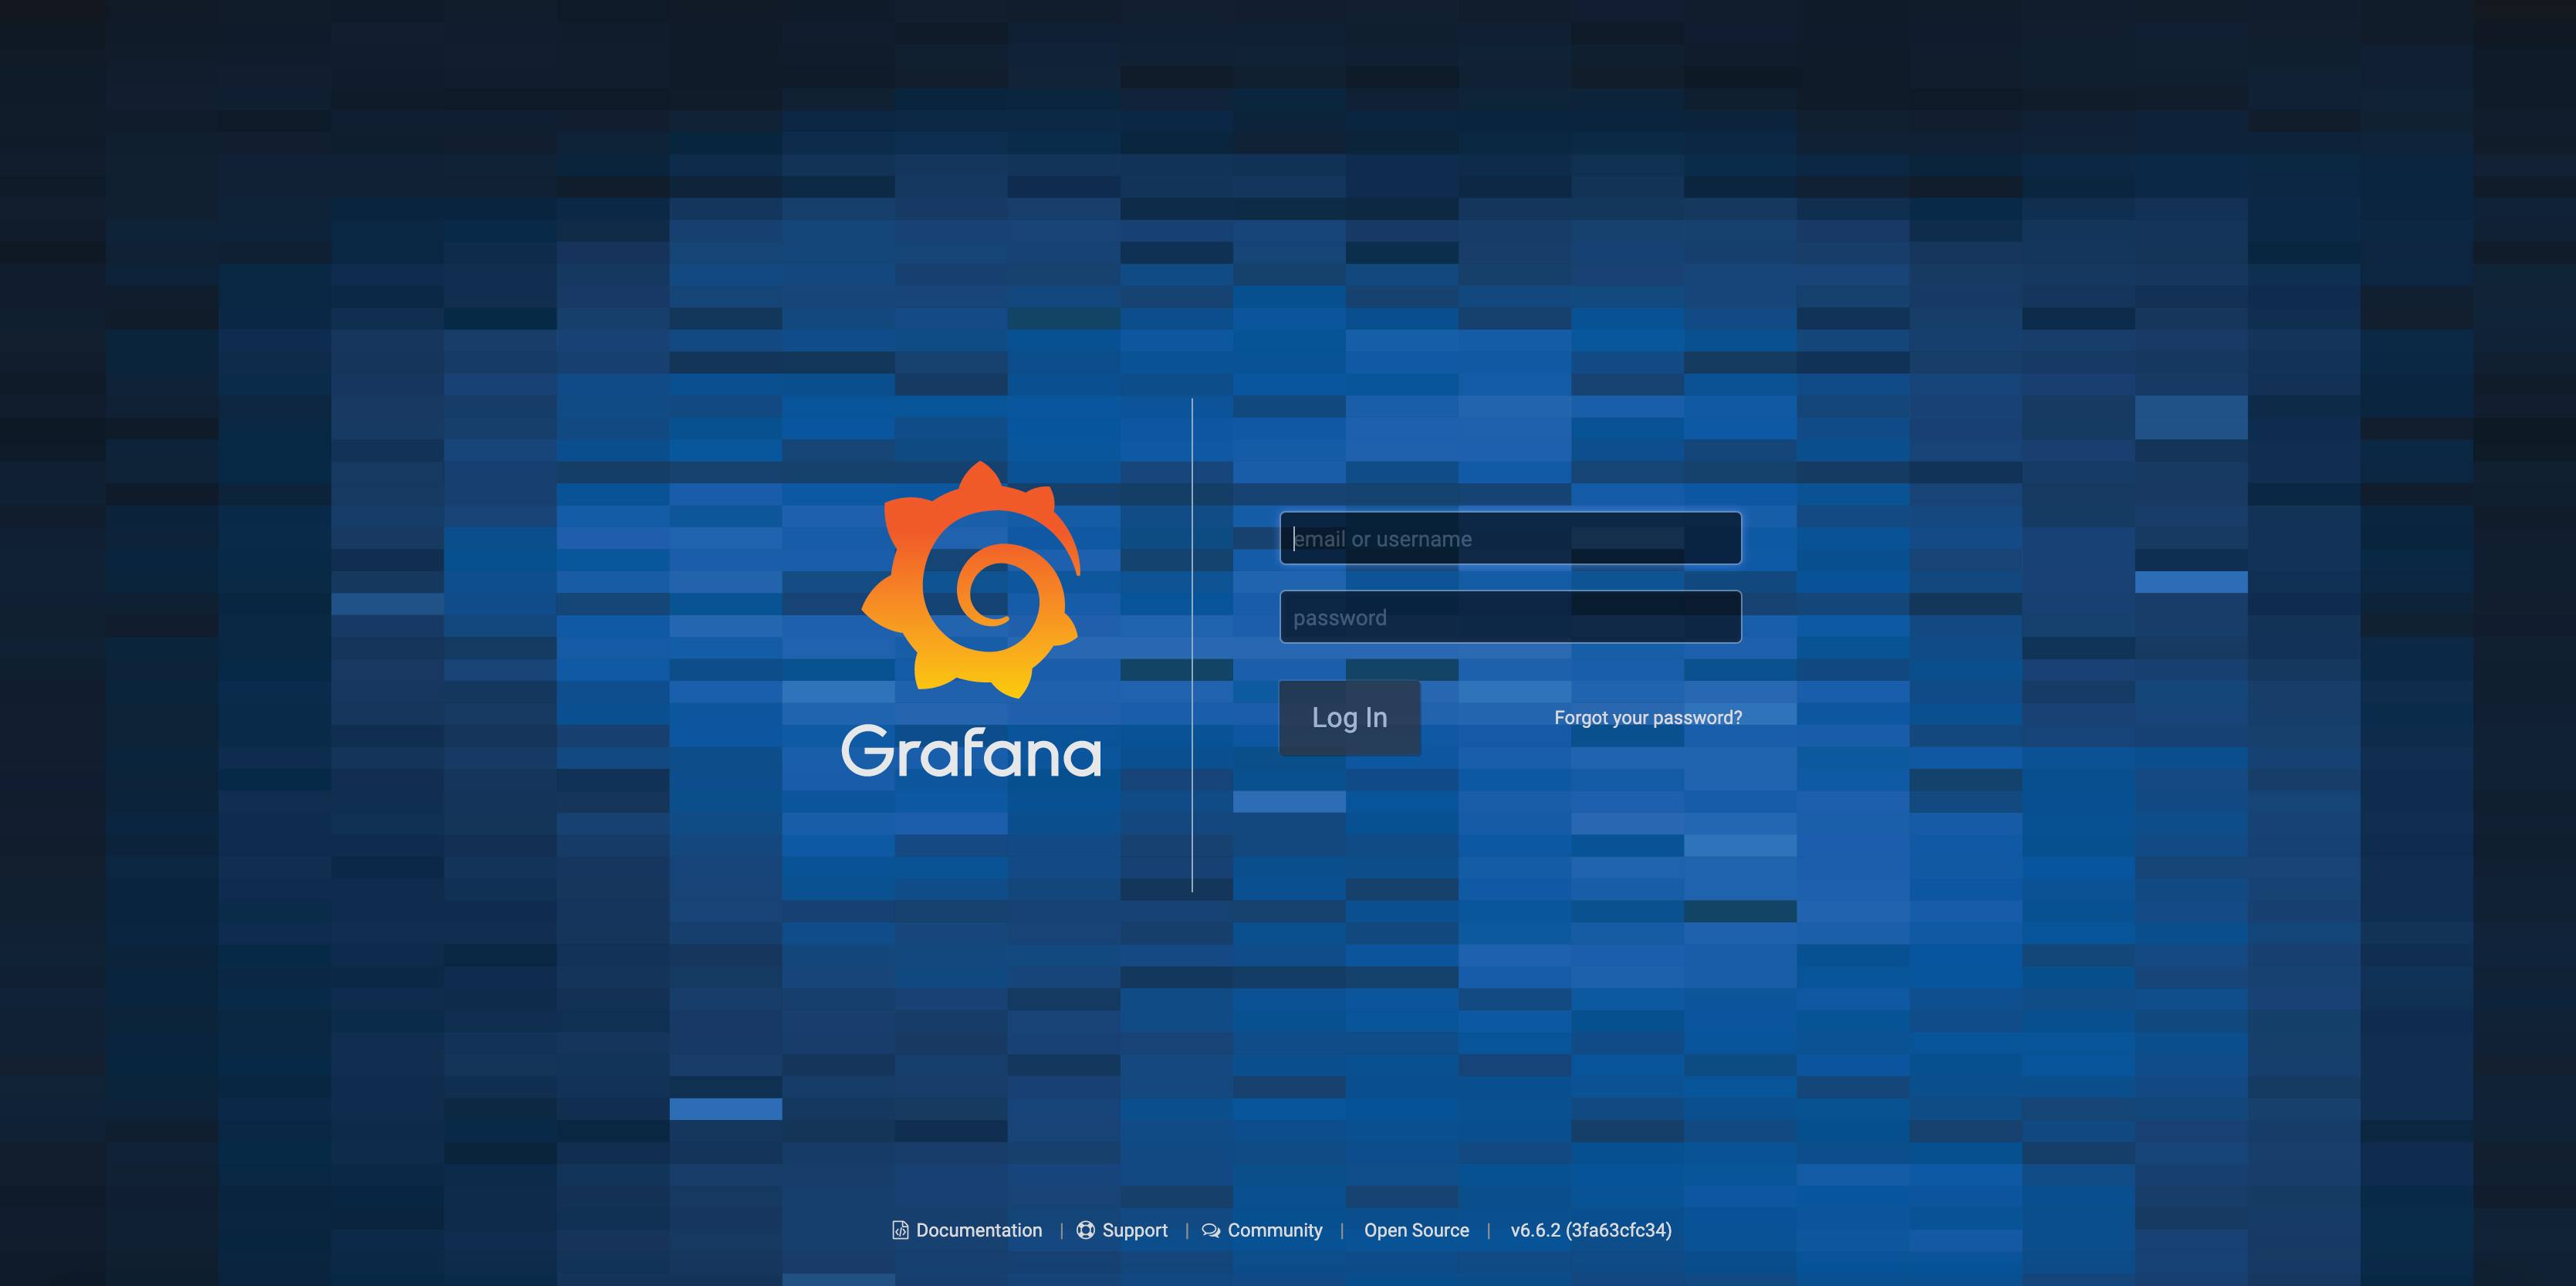 Log into Grafana with your admin username and password.